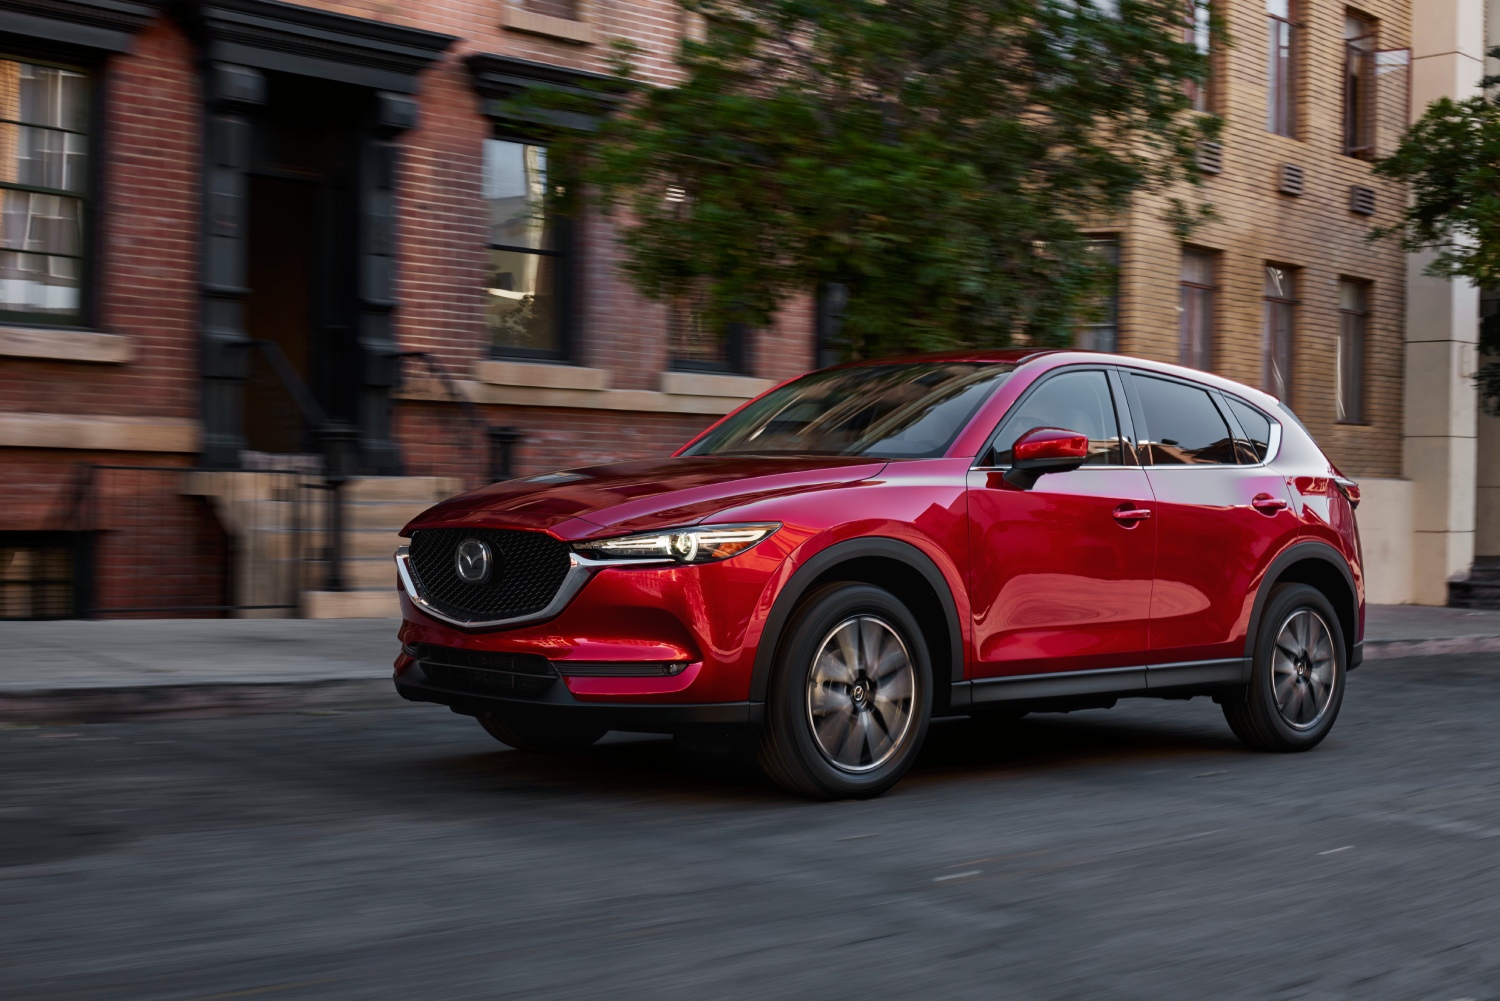 The best used SUVs for city driving include this Mazda CX-5